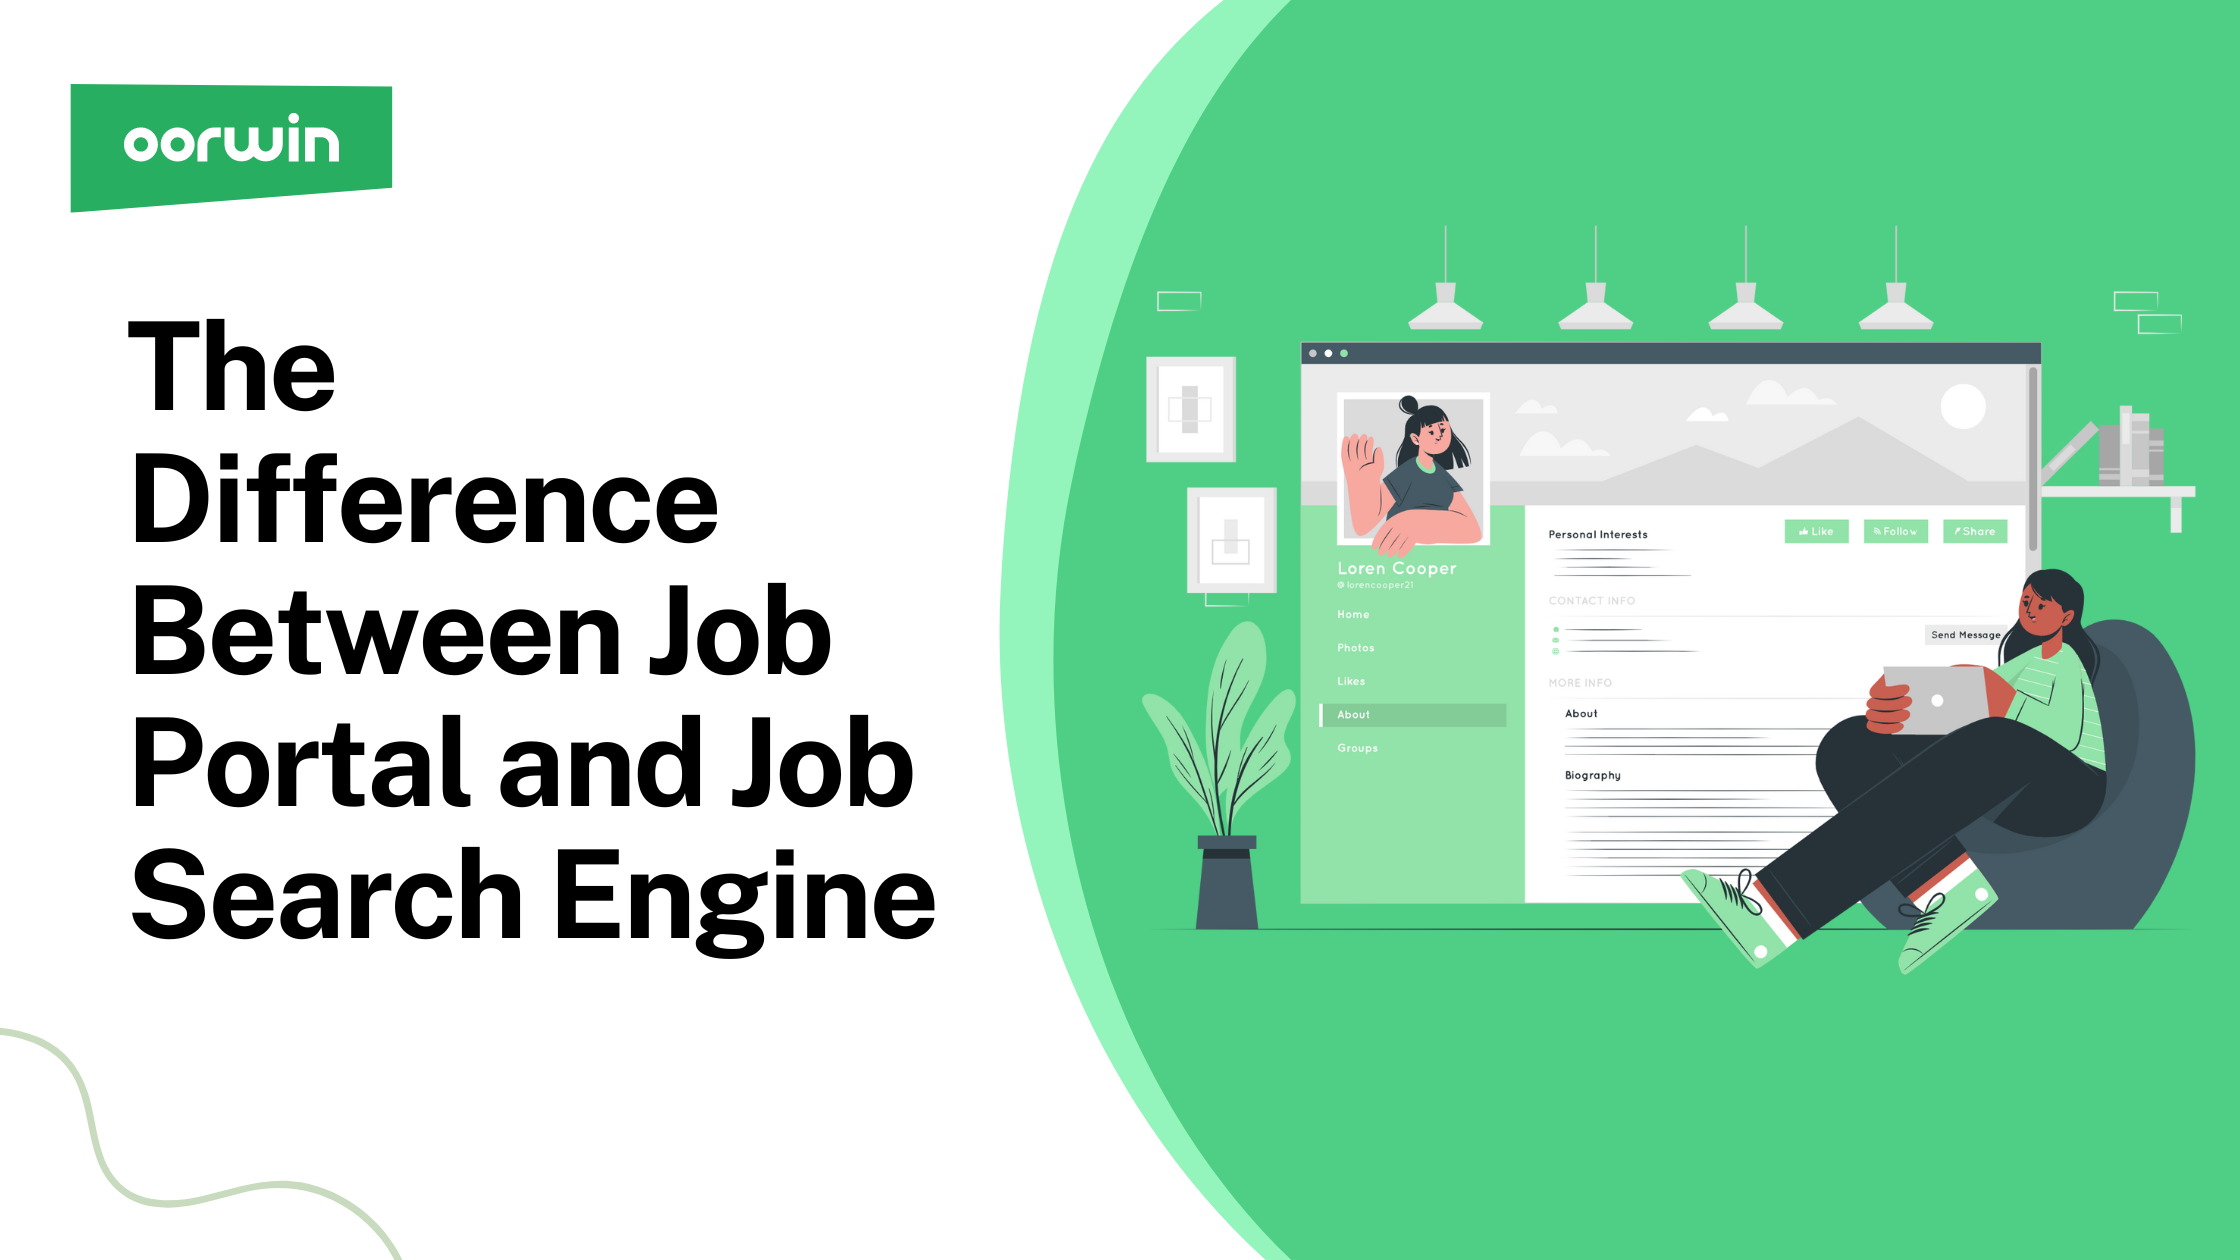 The Difference Between Job Portal and Job Search Engine